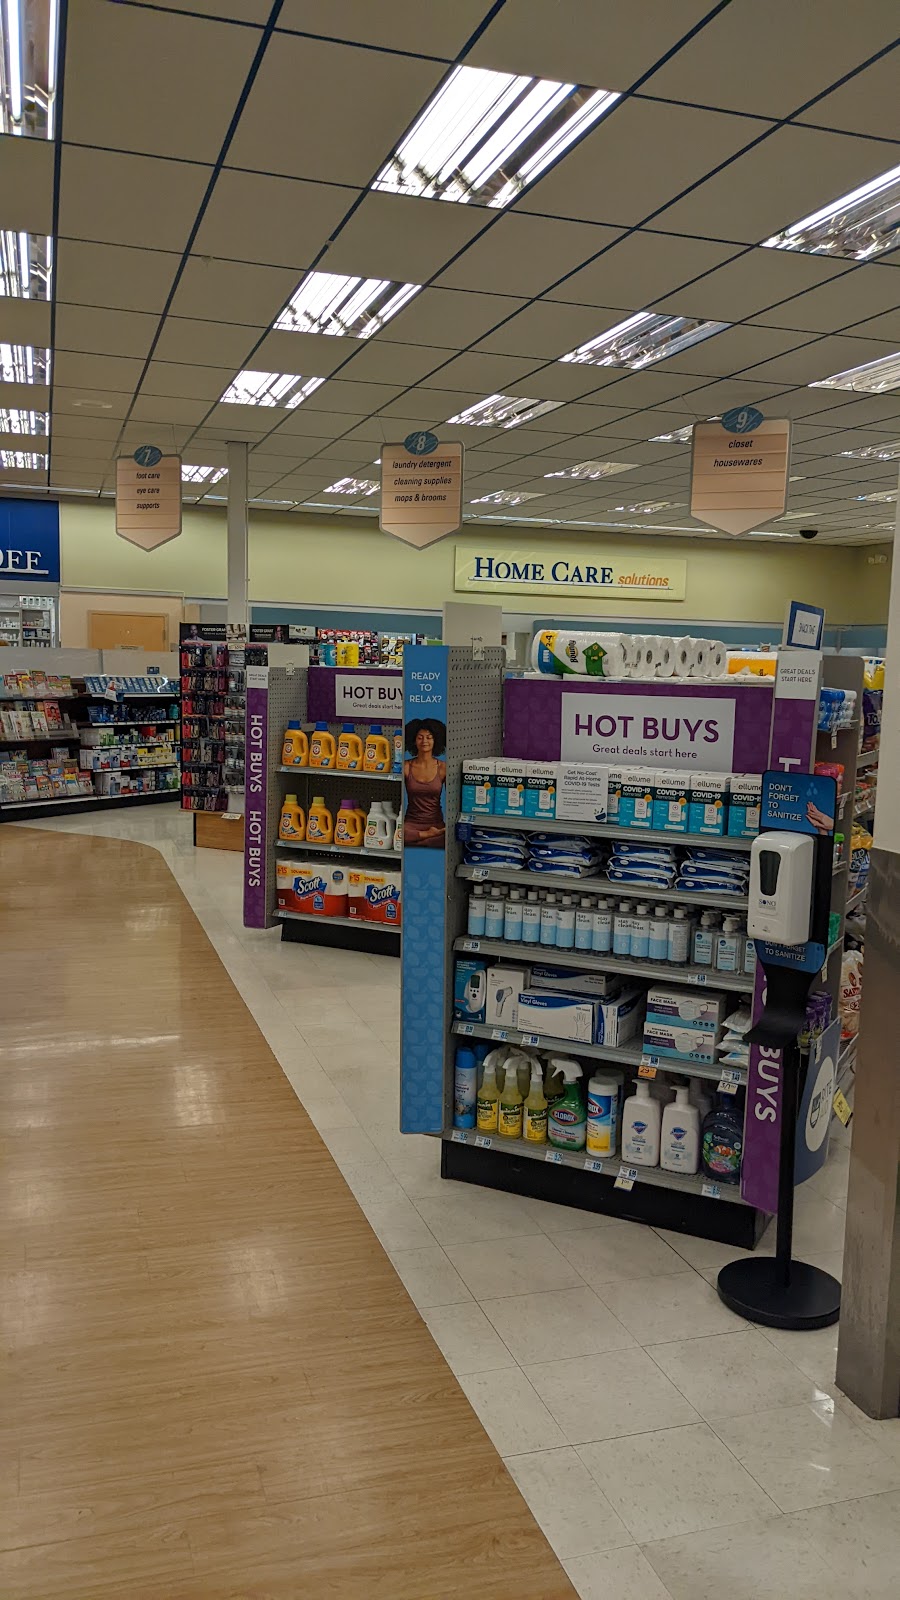 Rite Aid | 13090 Broadway, Alden, NY 14004 | Phone: (716) 937-9141